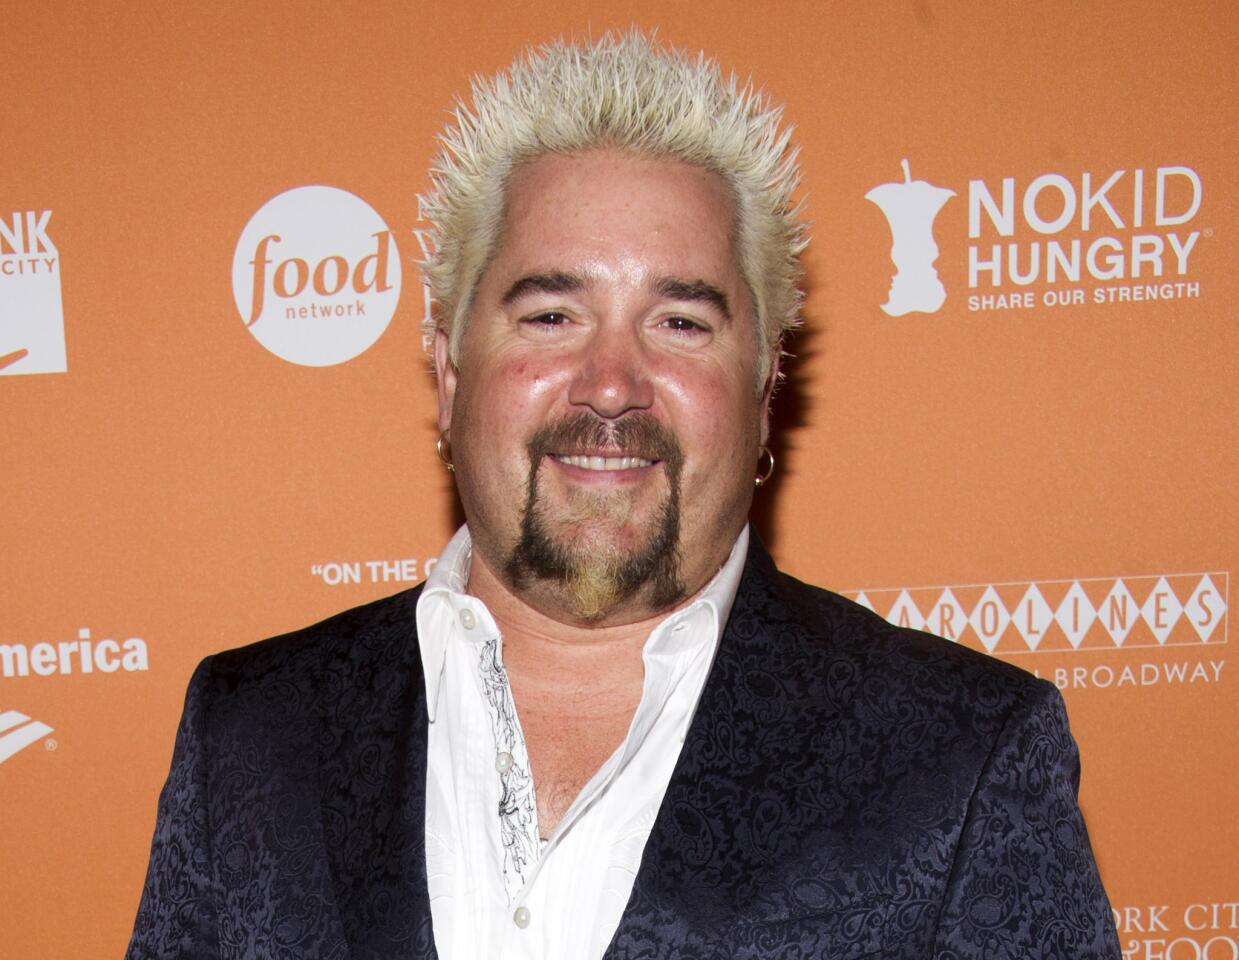 Guy Fieri's new restaurant gets scorched in the media